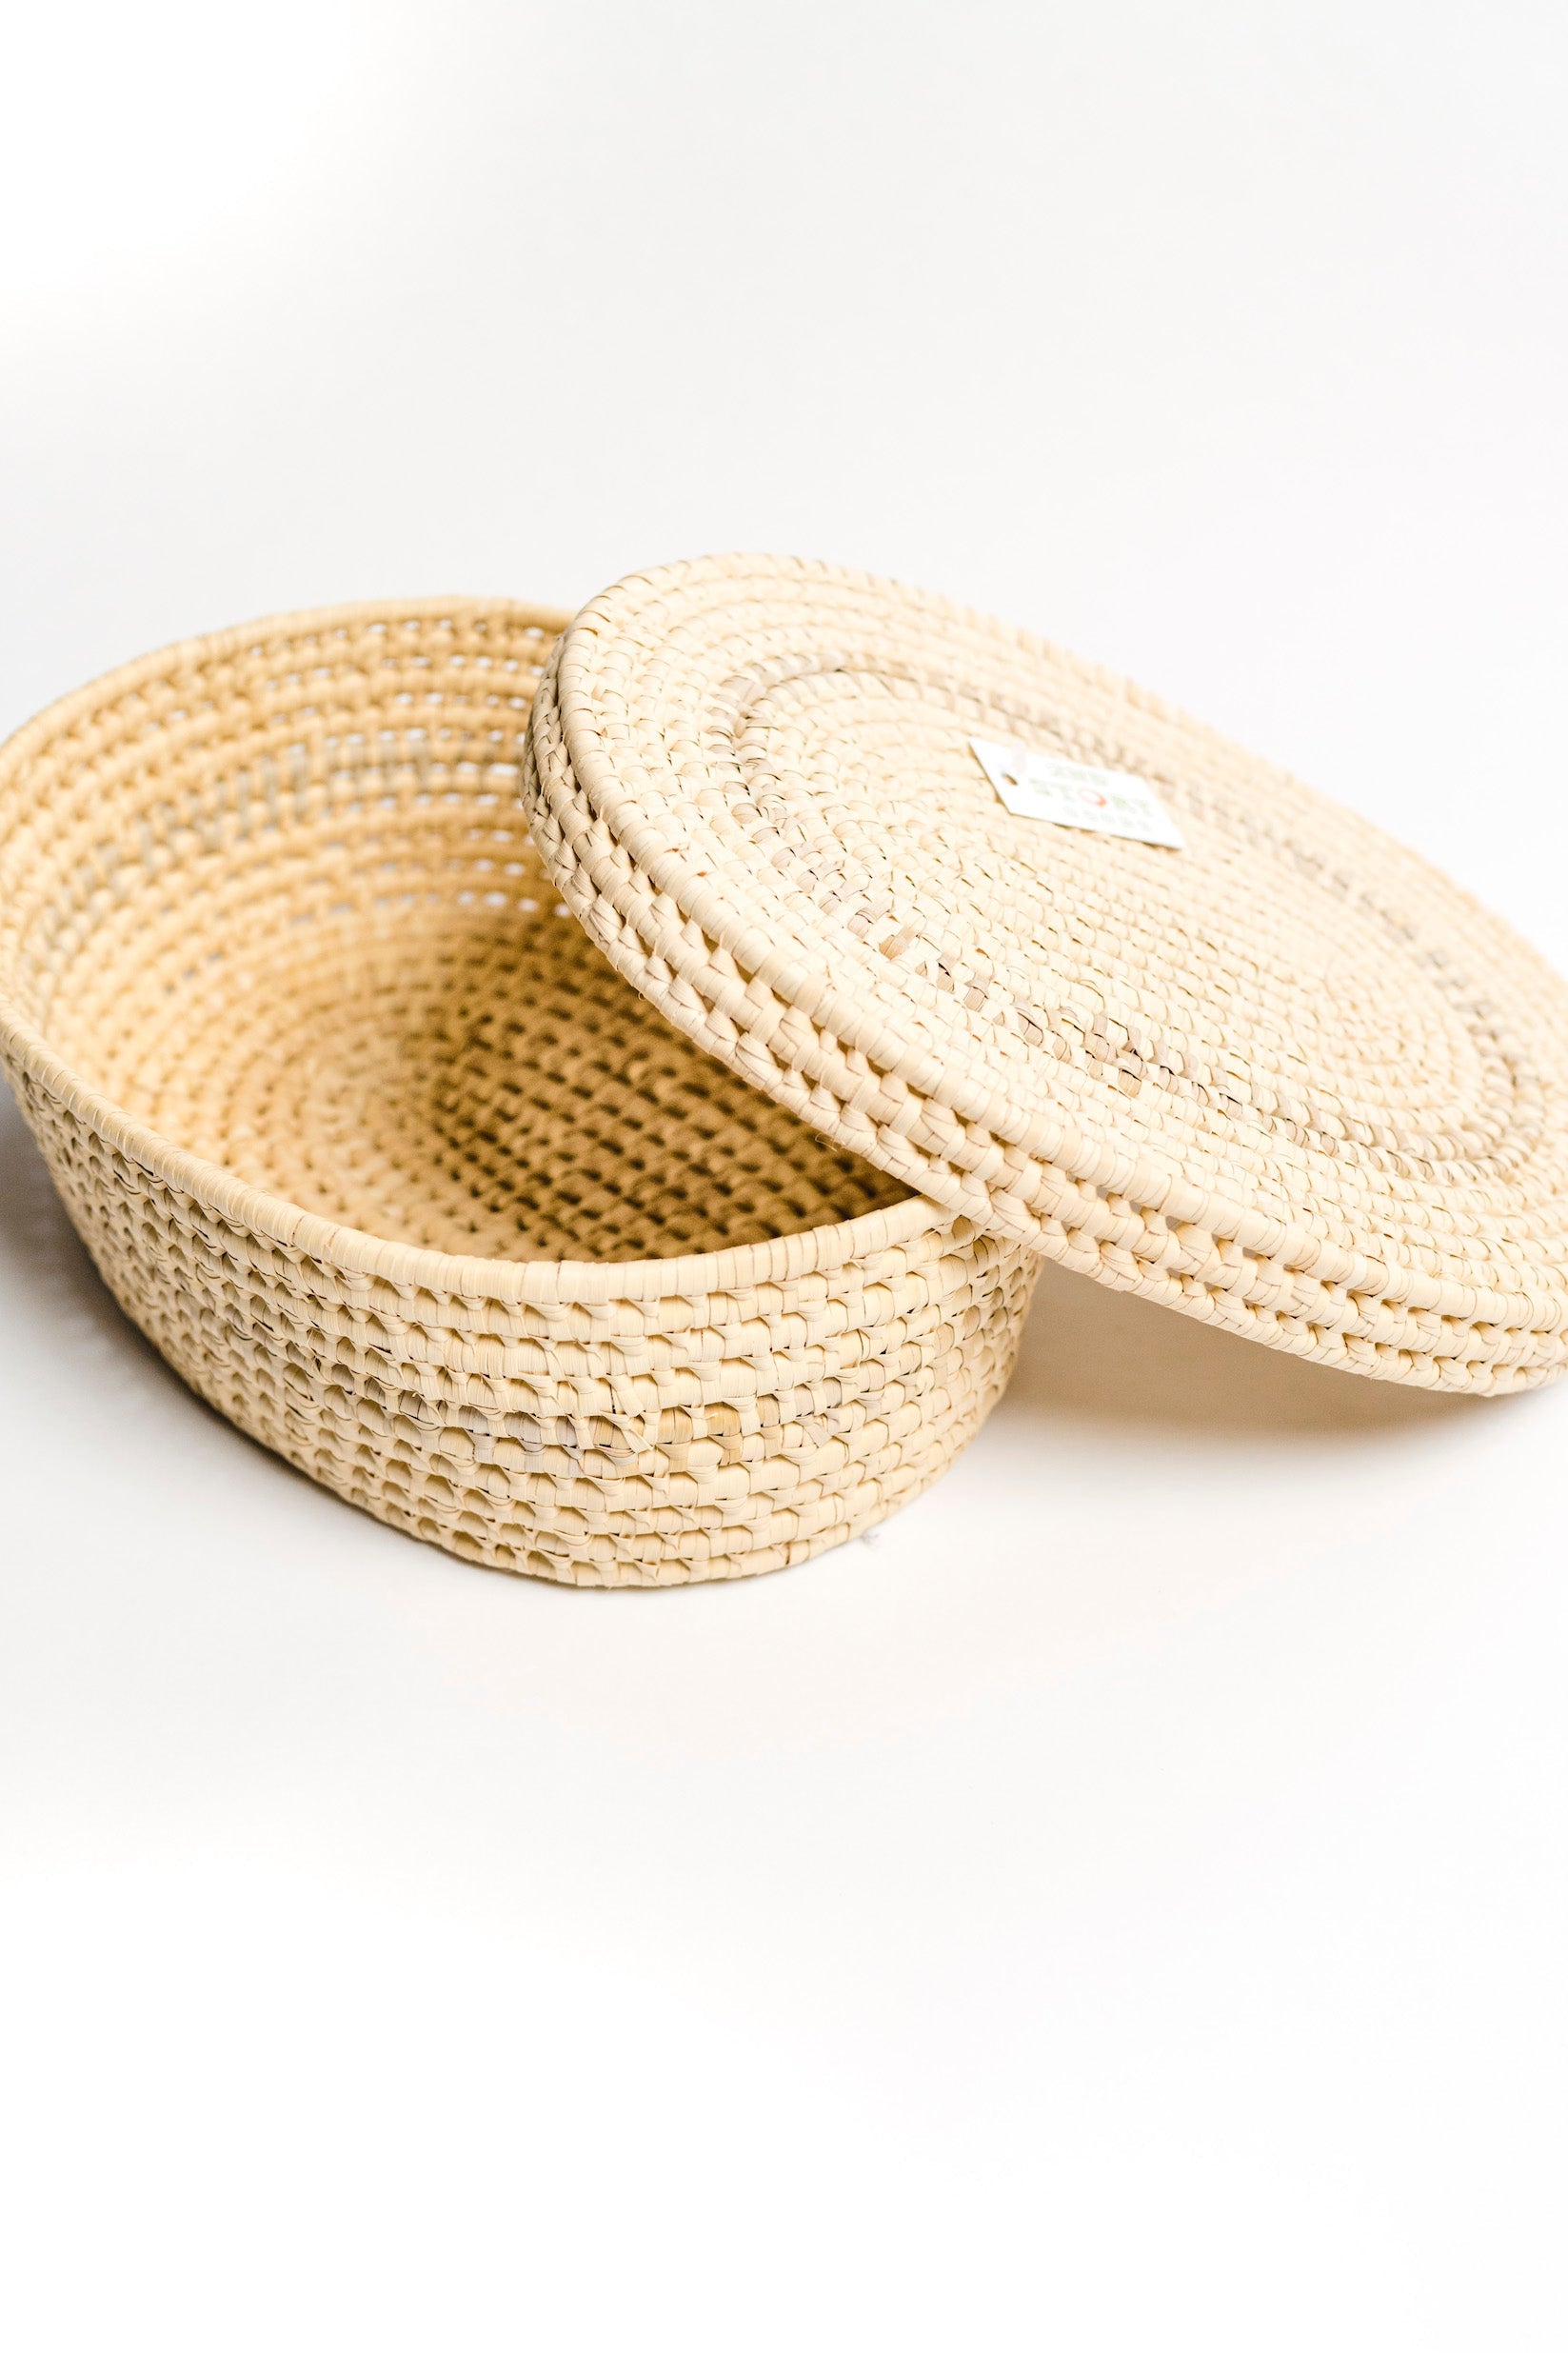 Oval Basket With Lid by 2nd Story Goods